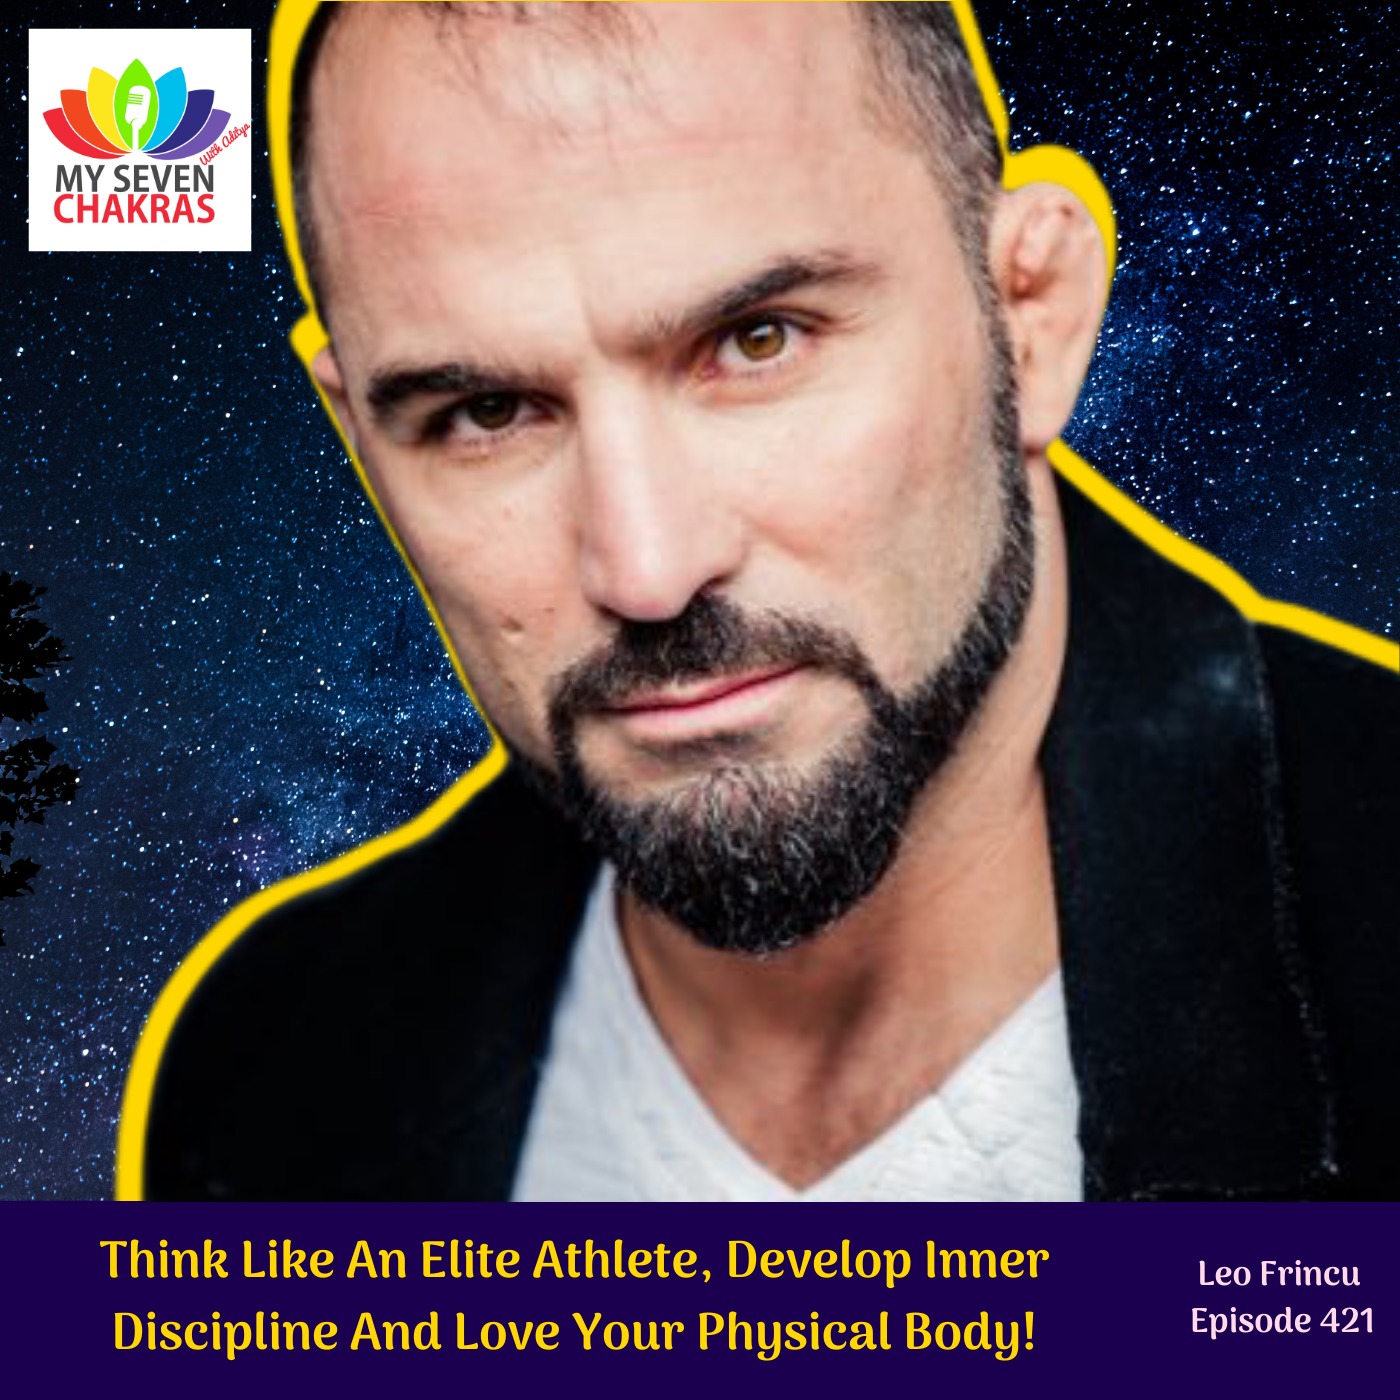 Think Like An Elite Athlete, Develop Inner Discipline And Love Your Physical Body!